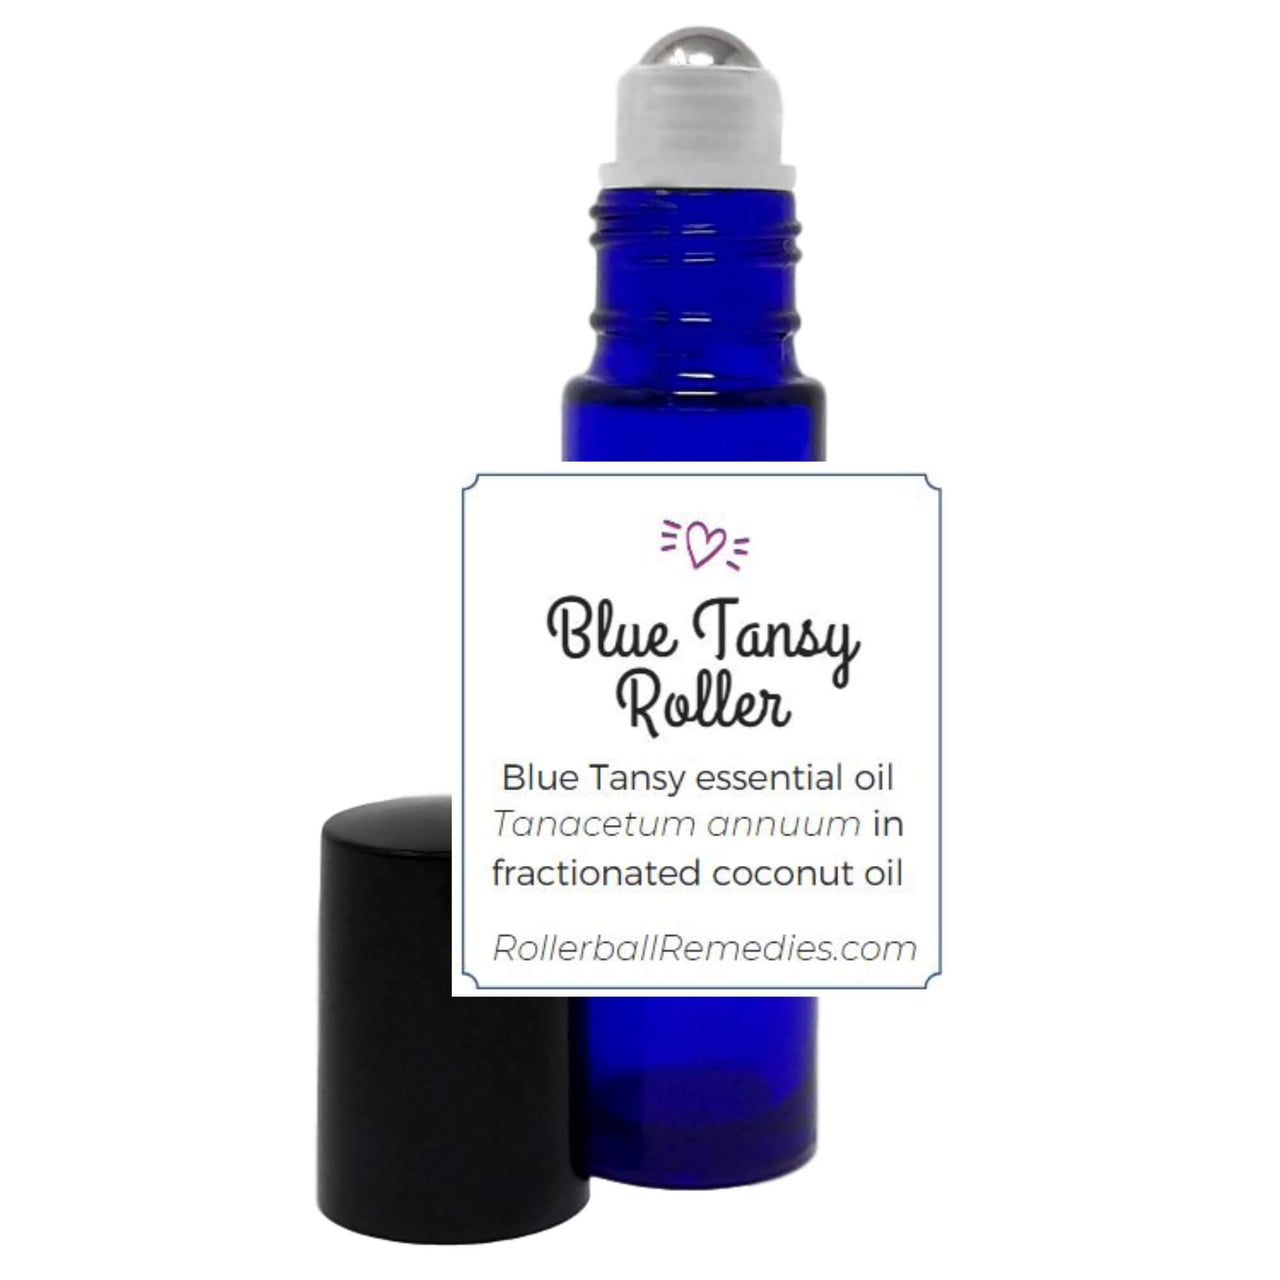 Blue Tansy Essential Oil Roller Blend 10 ml for Skin, Bug Bites and Stress